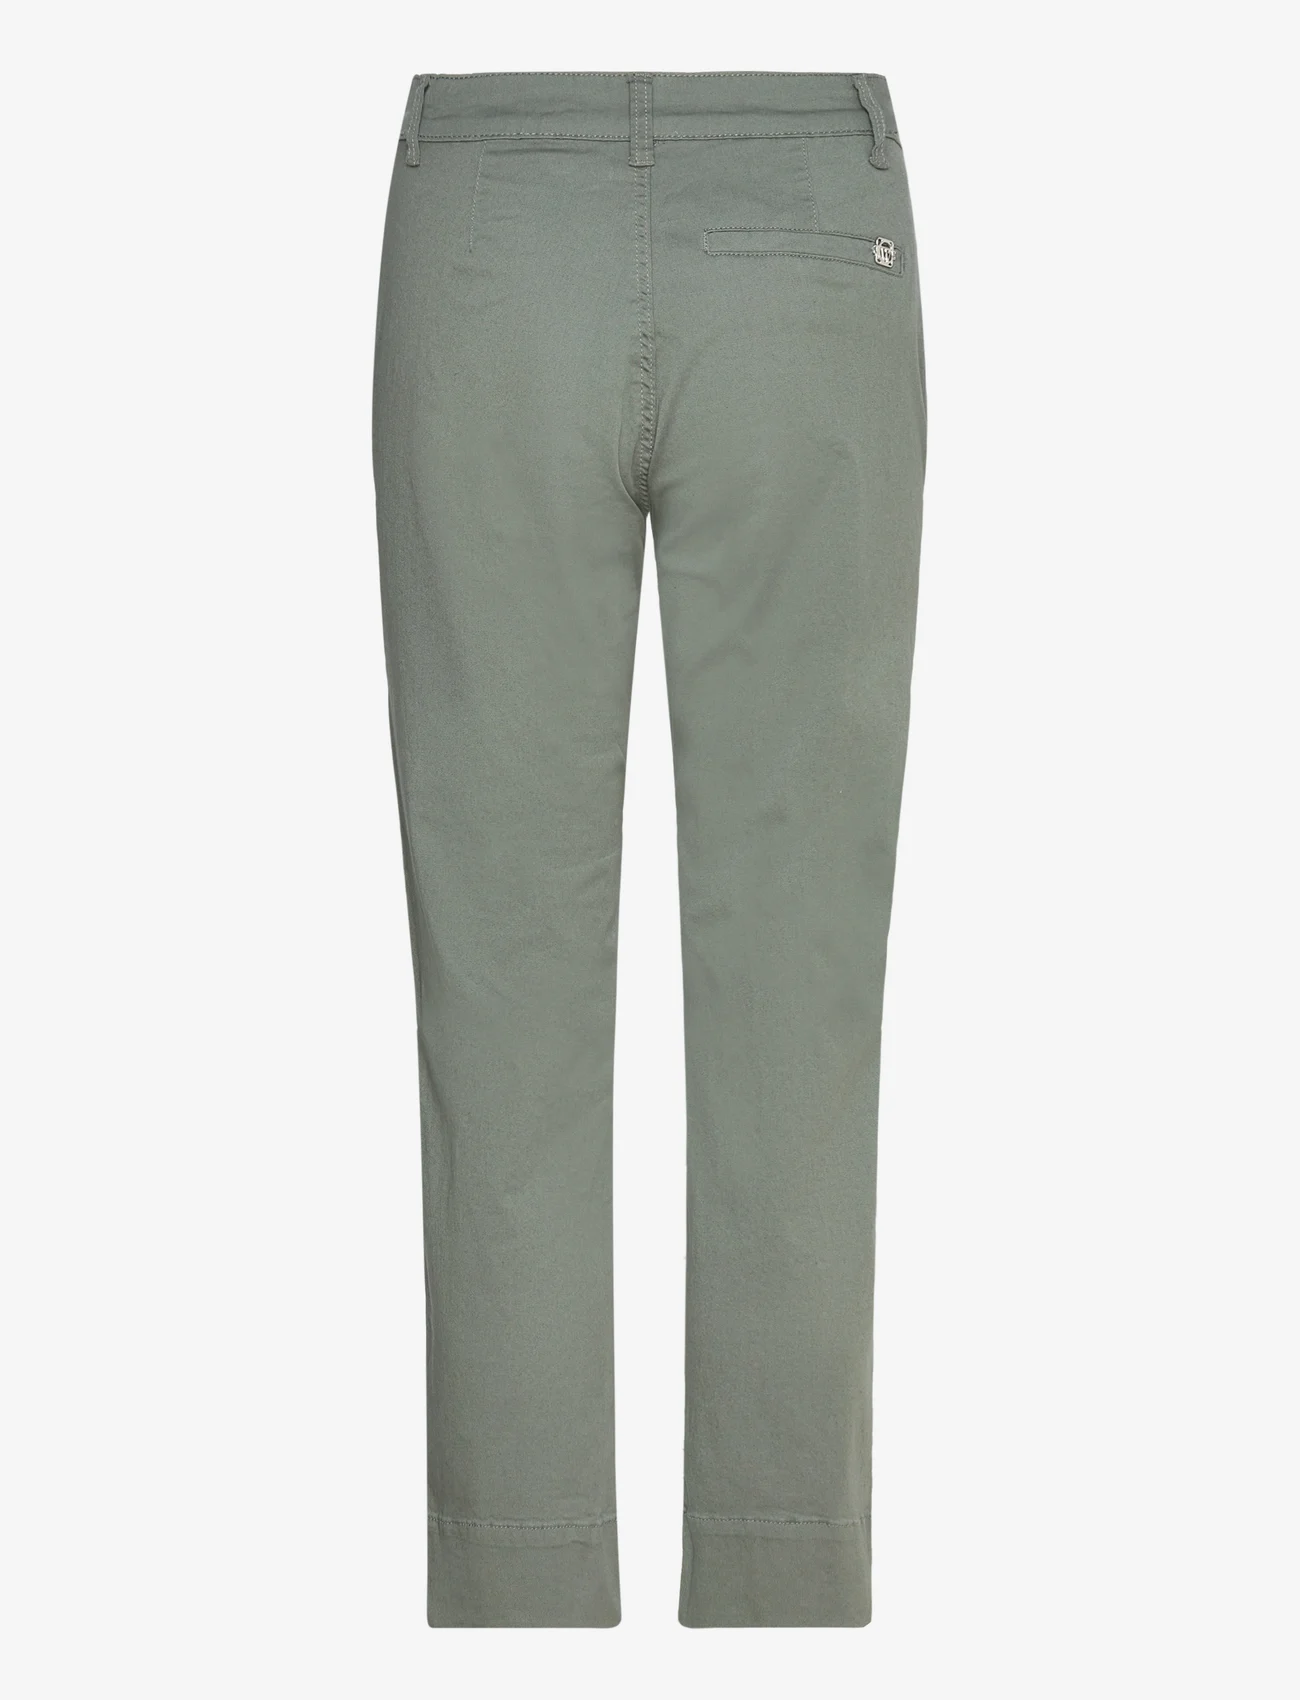 Claire Woman - Thareza - Trousers - chino püksid - olive dust - 1